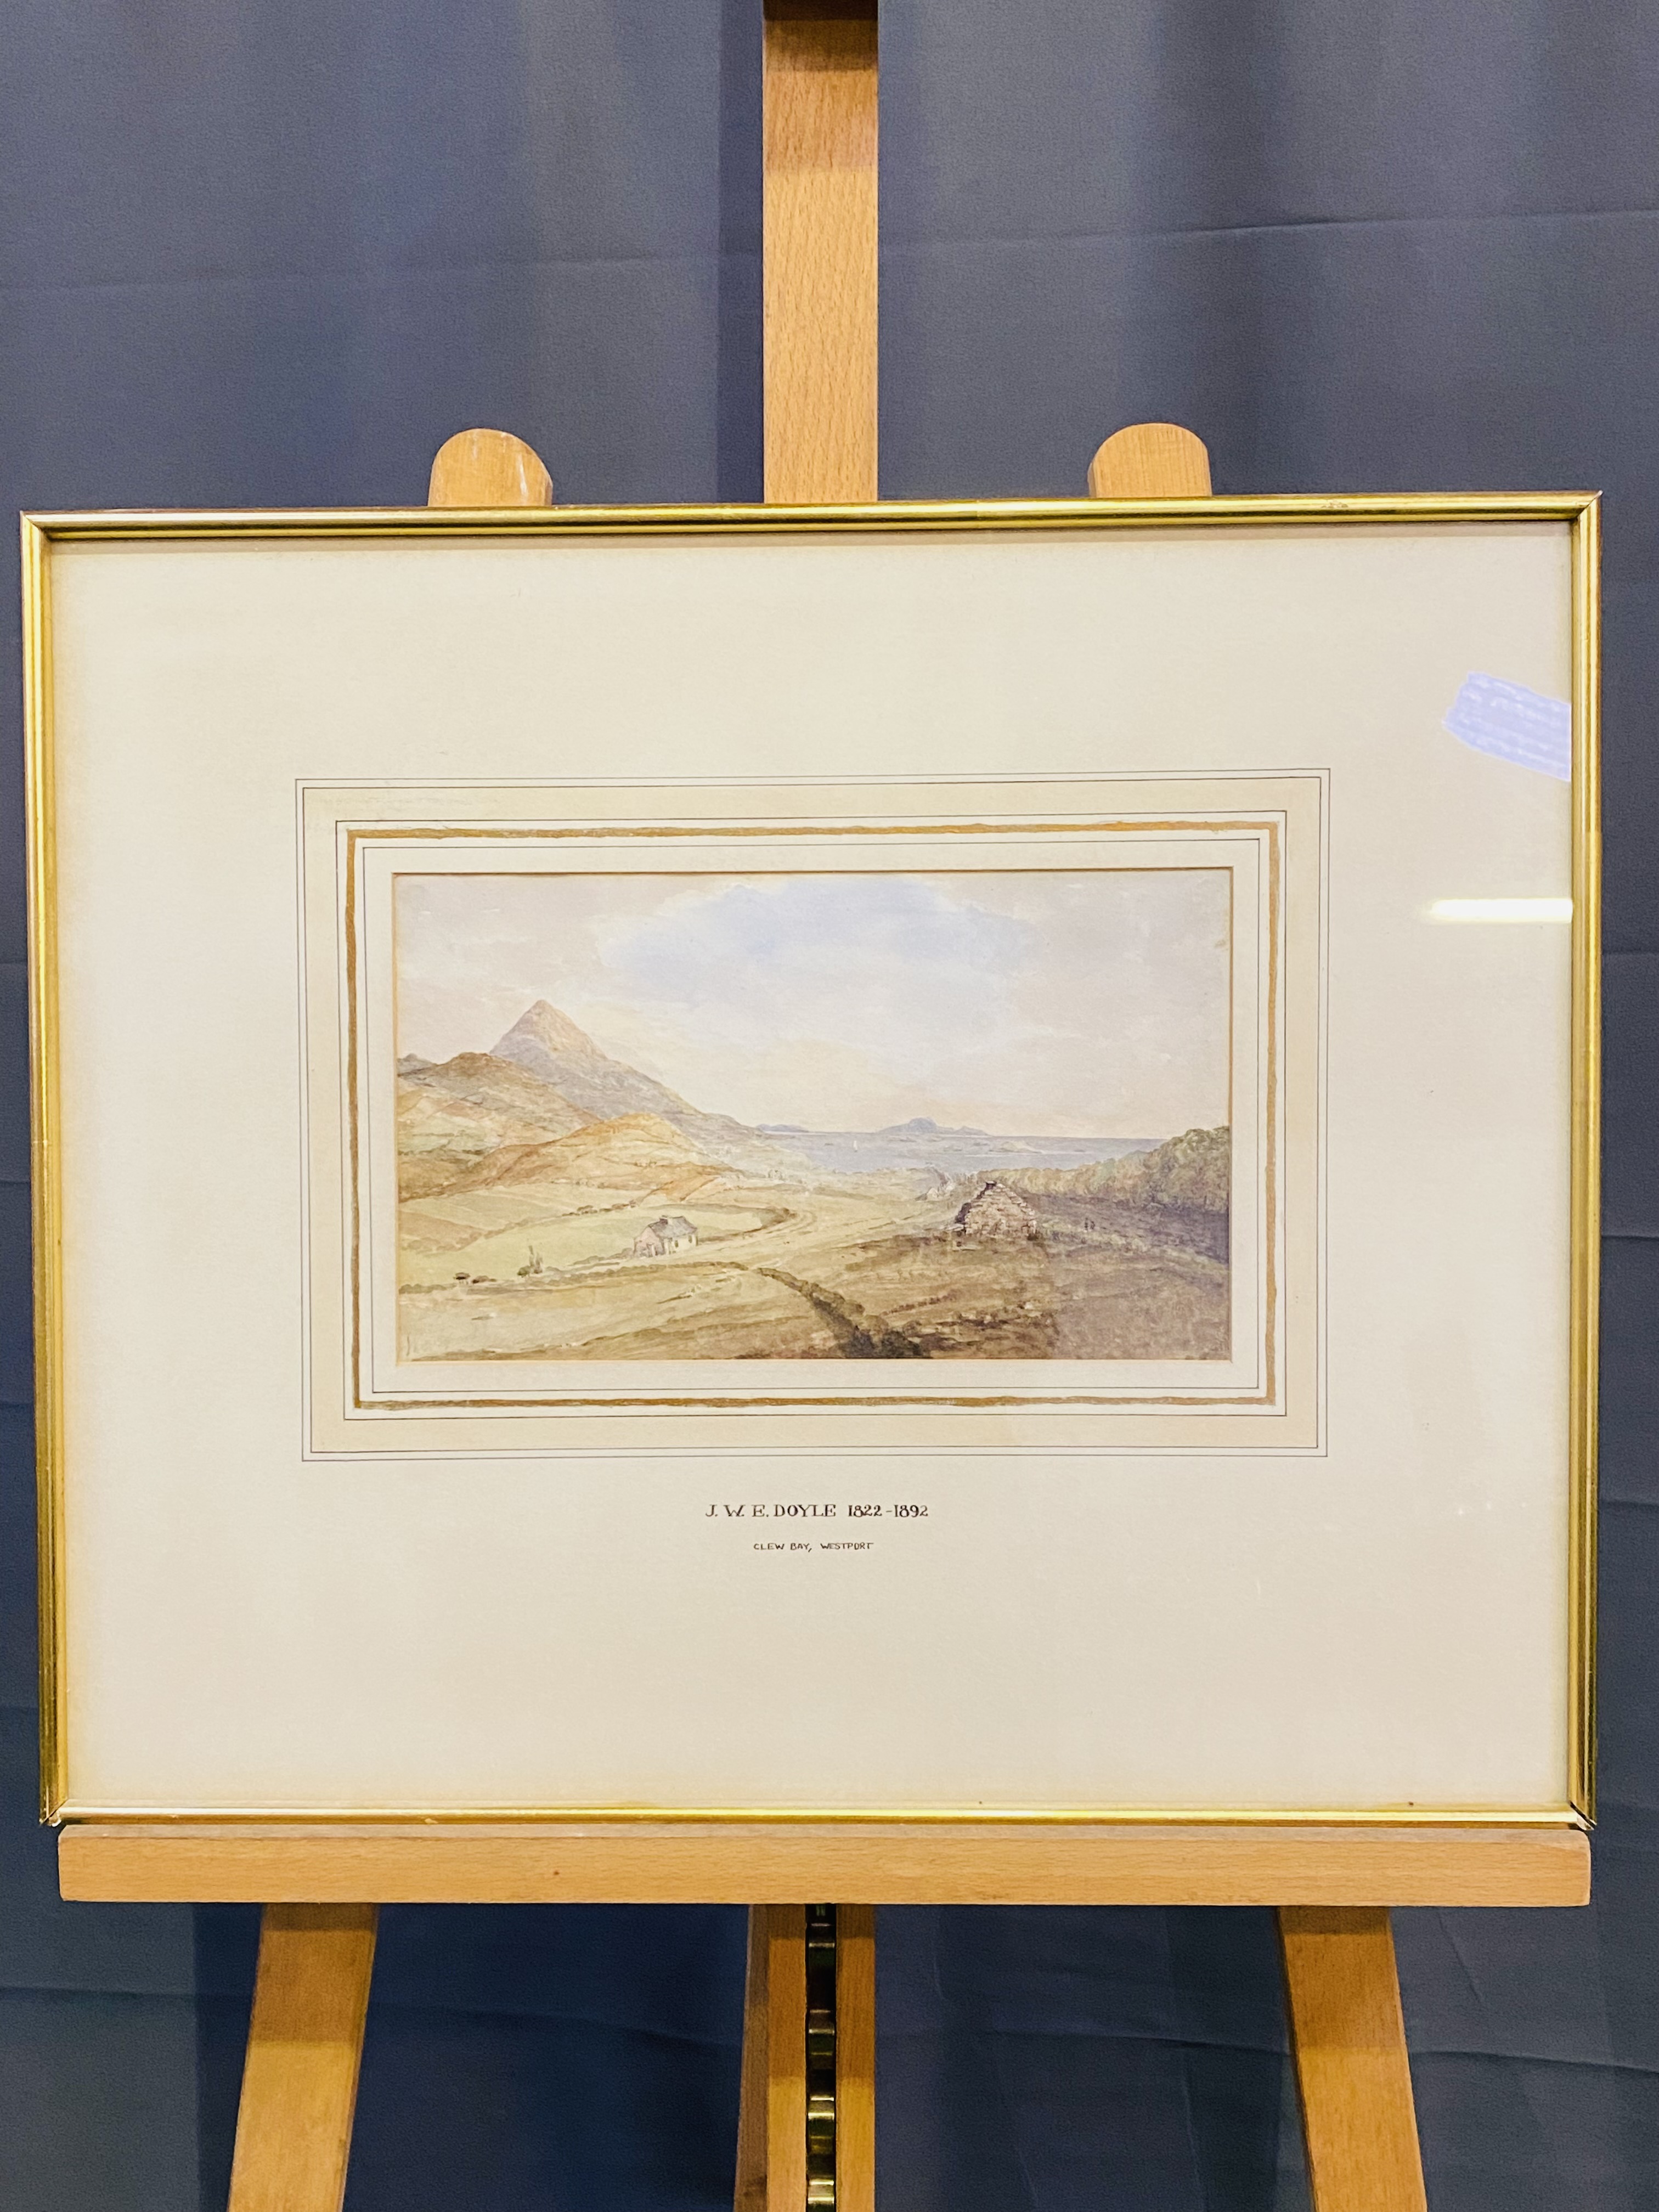 Framed and glazed watercolour of a landscape written to border, J W Doyle 1822 - 1892 - Image 2 of 4